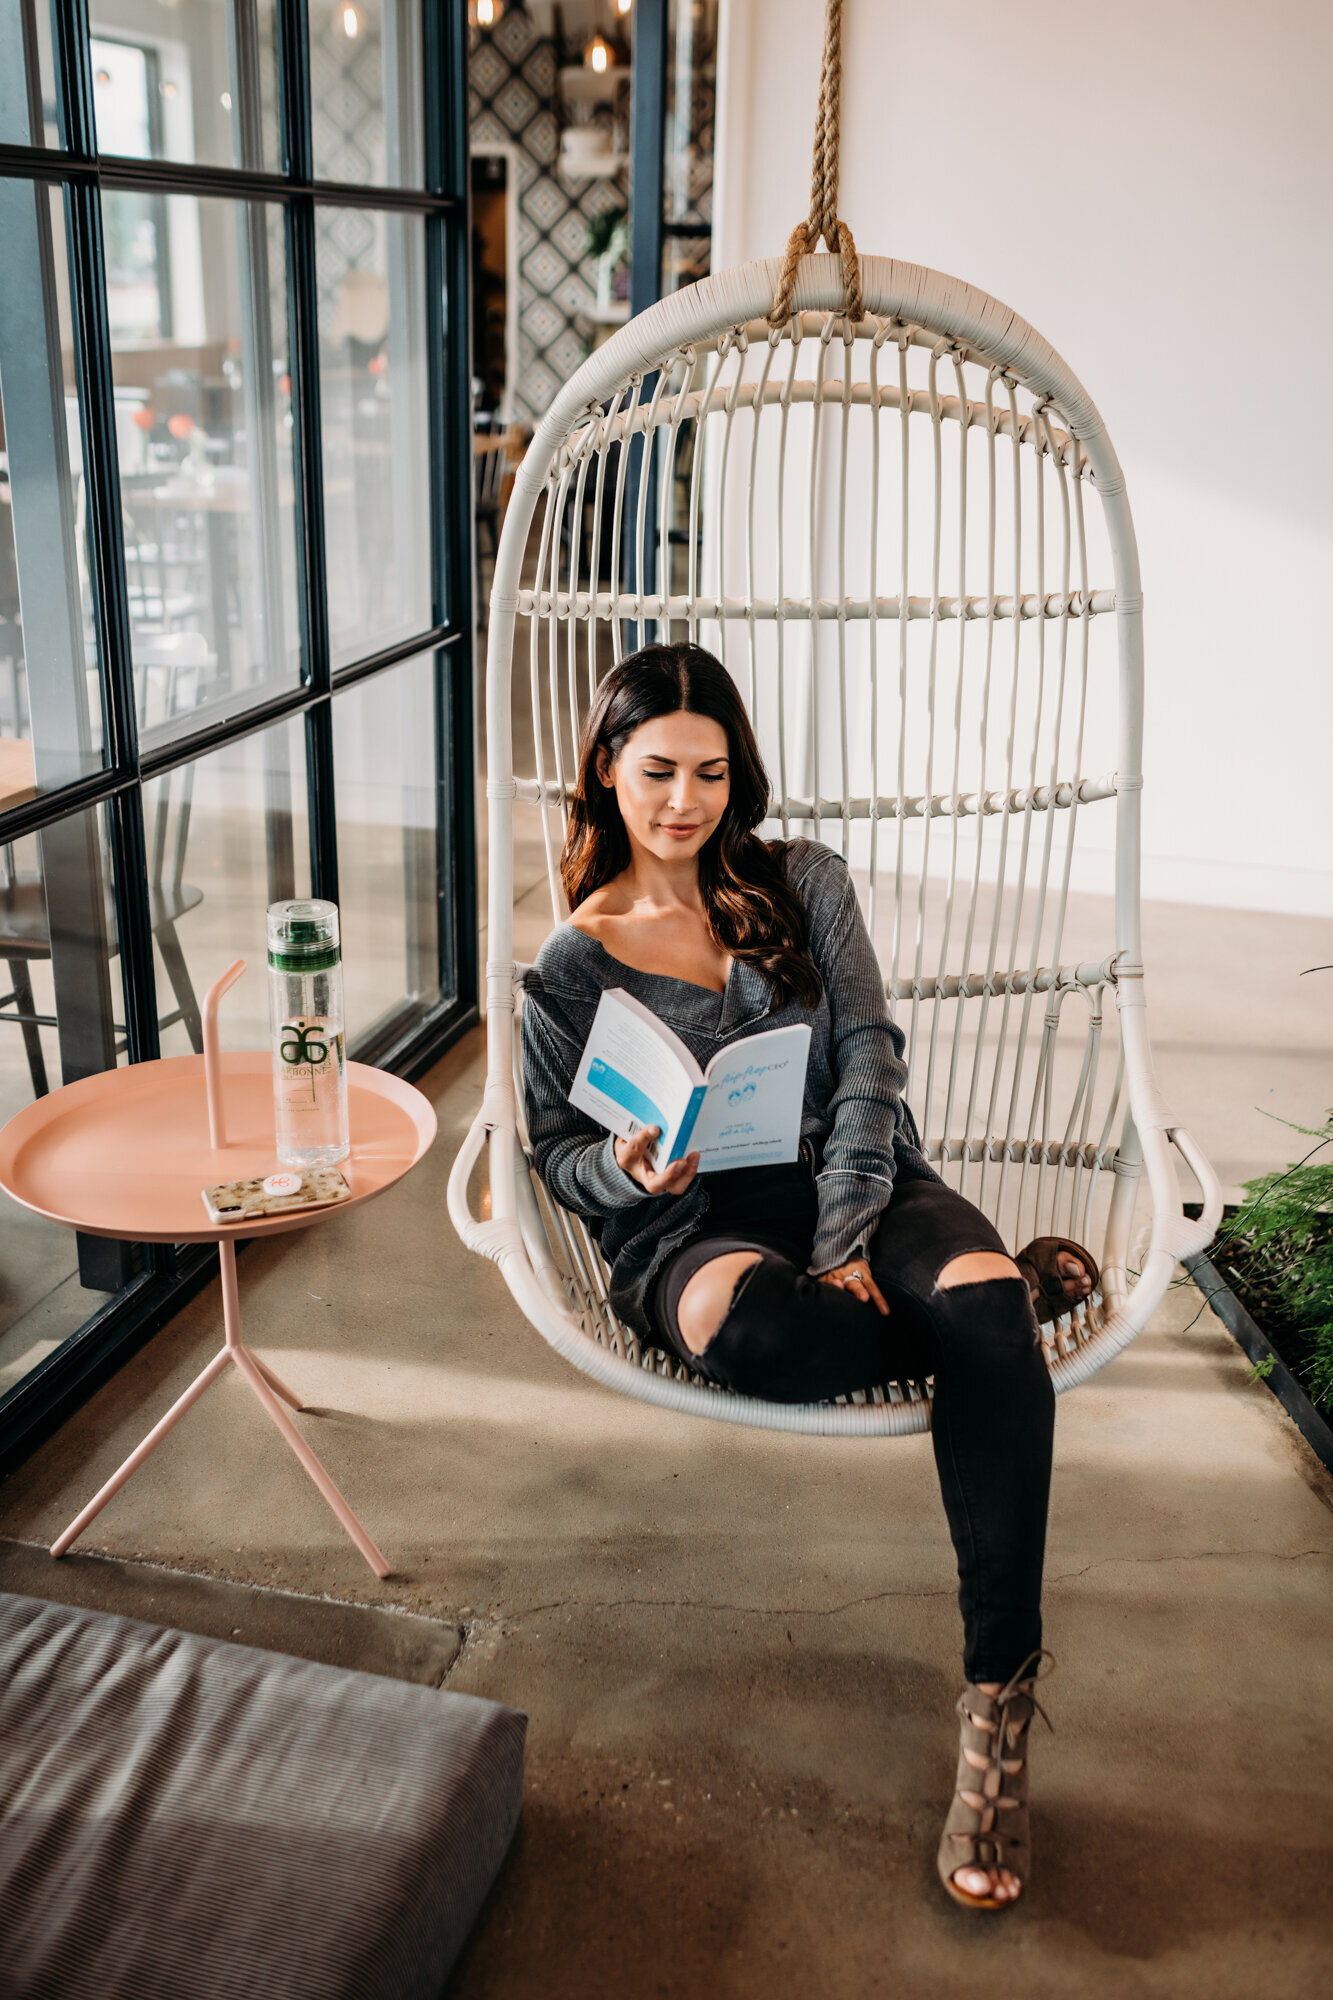 Branding Photographer, a woman sits in a boho style wicker chair swing reading a book